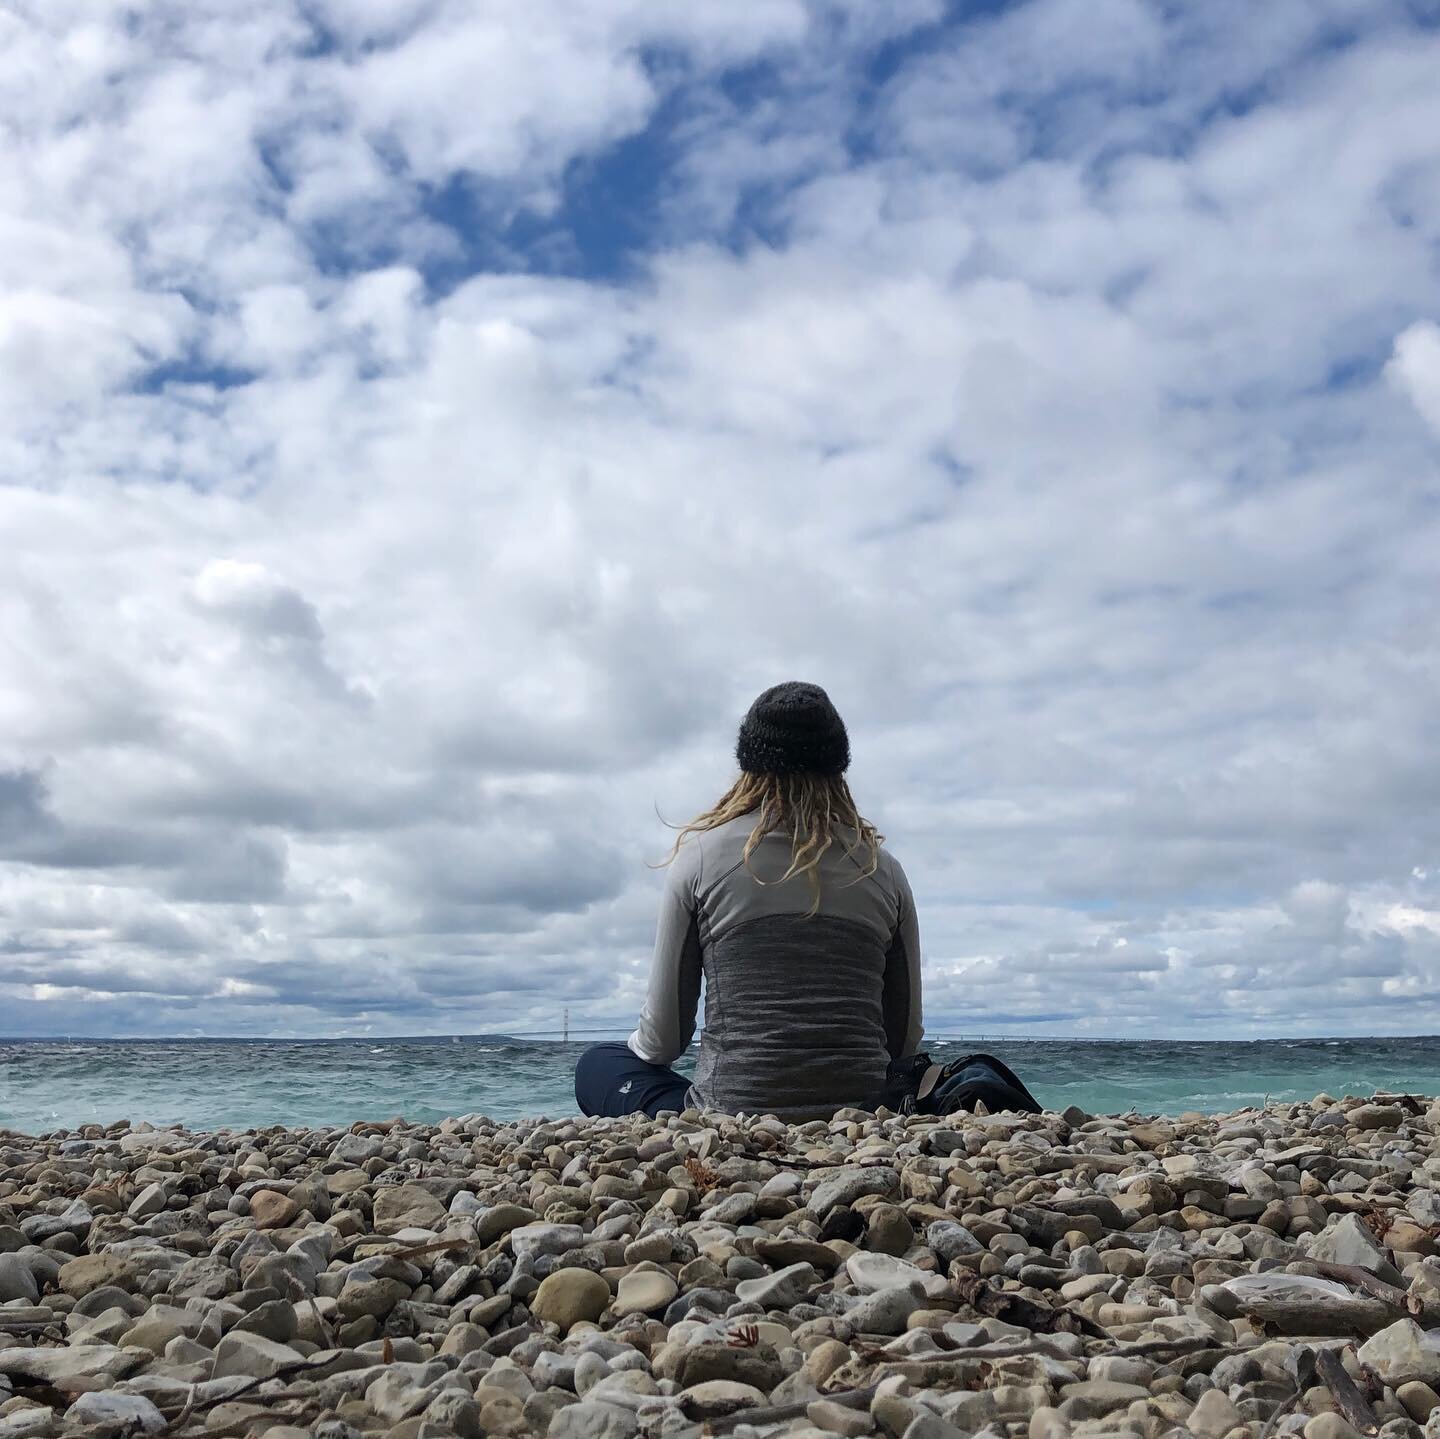 Just getting in a little meditation by the water... sippin on a little coffee, and soakin up all of the beauty that surrounds us 

Winding down my season on mackinac island... only one more at the end of October (10/30, 10/31) after tonight at Horns.